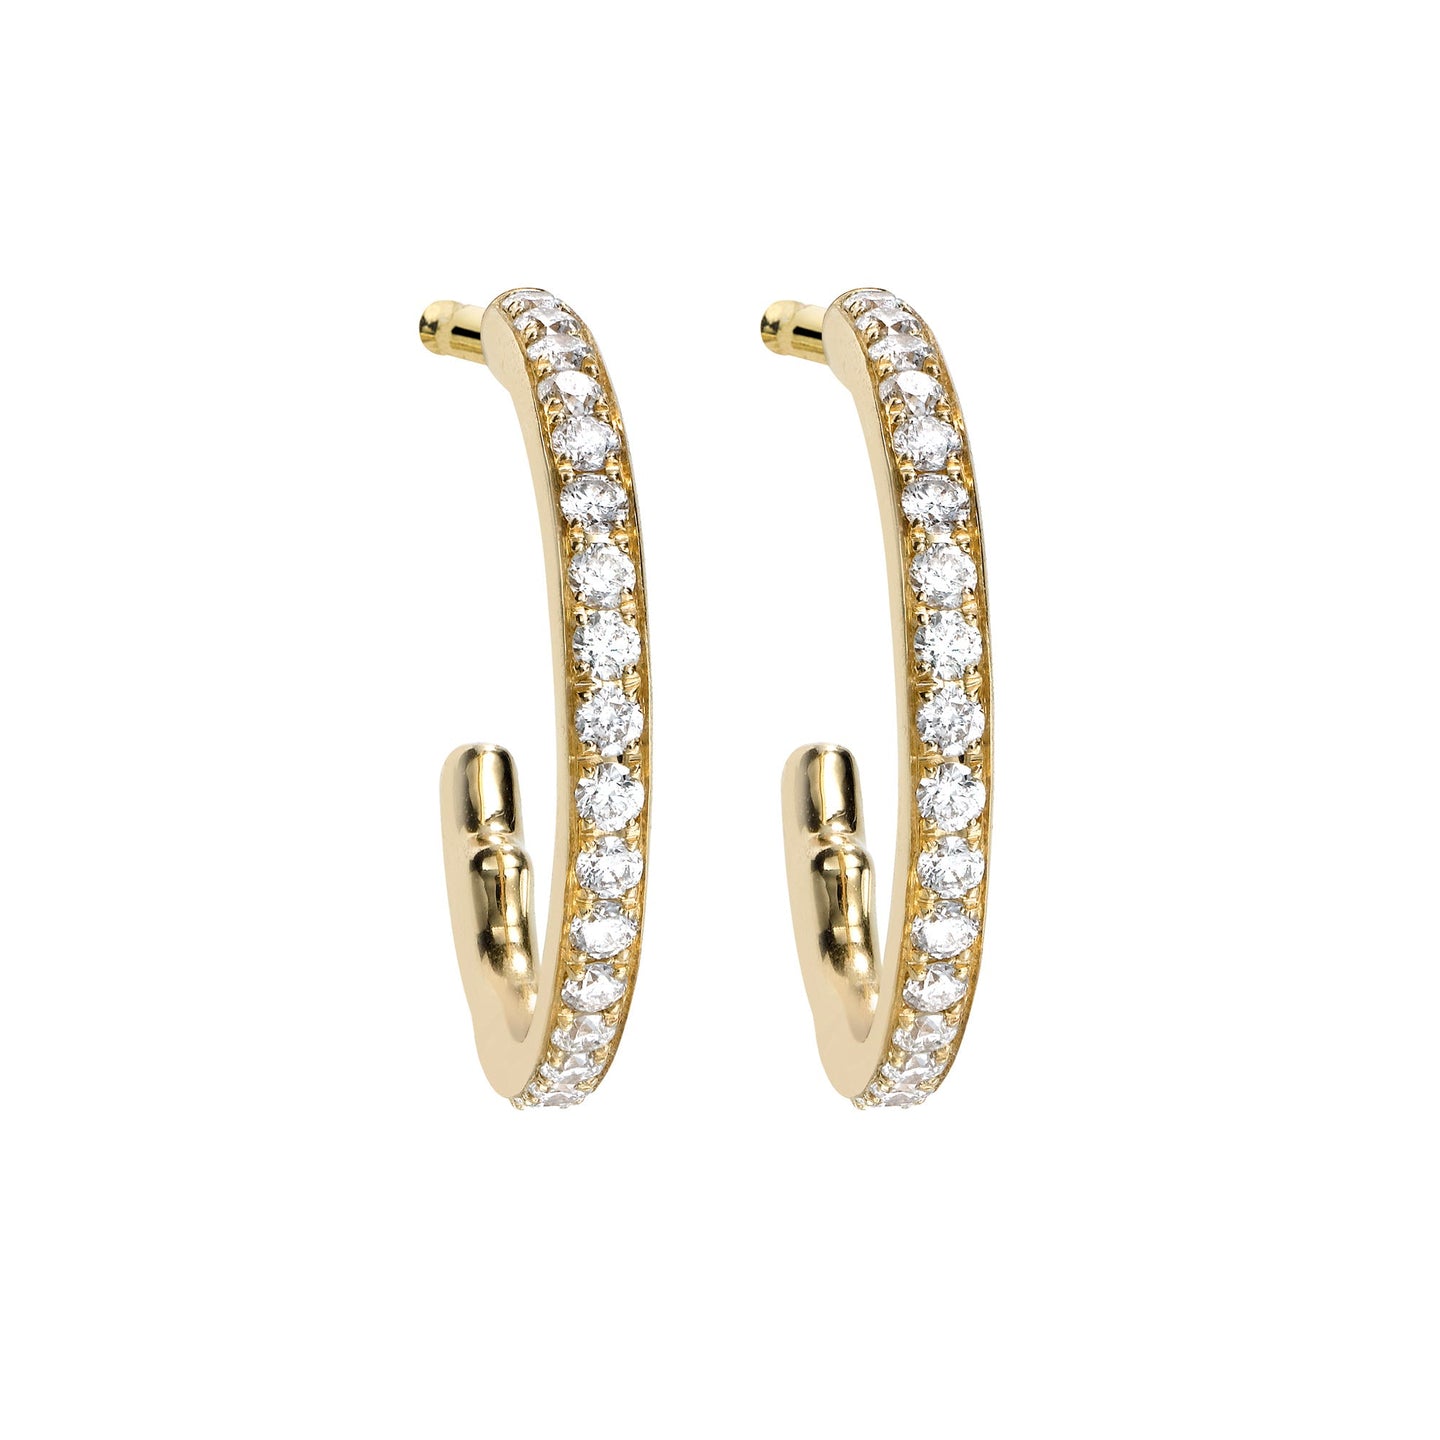 Woodland Hoop Earrings in 18ct Yellow Gold with Diamonds